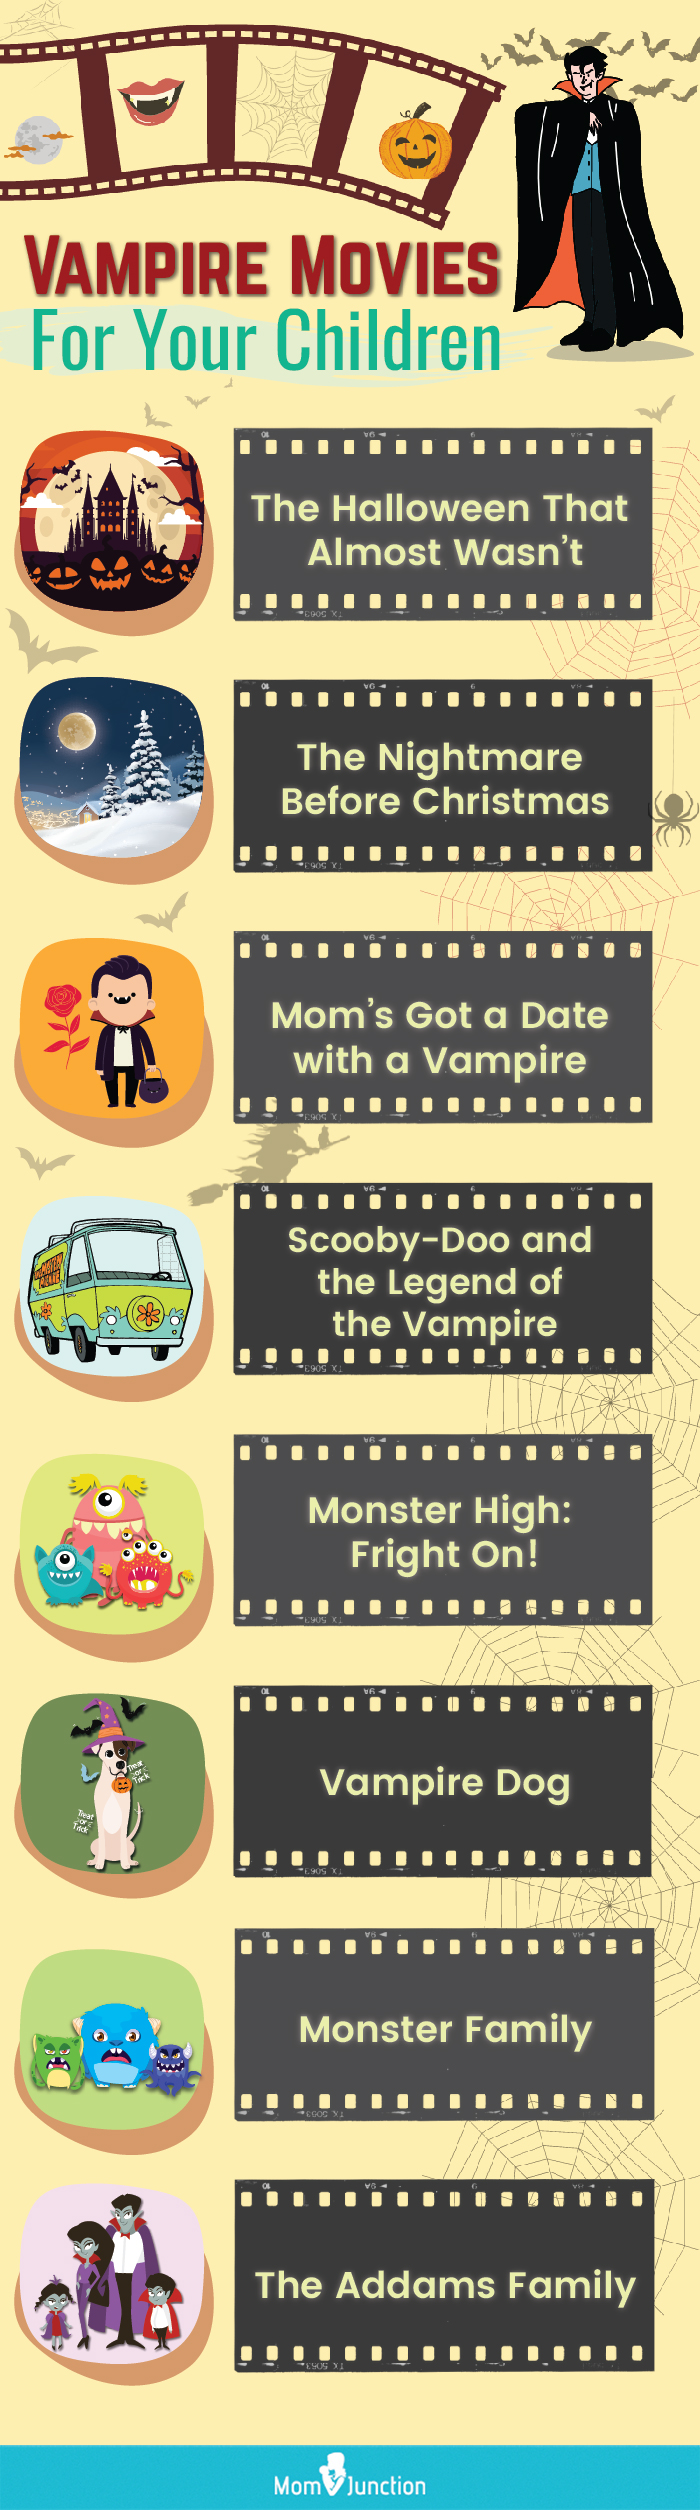 child-friendly movies on vampires (infographic)